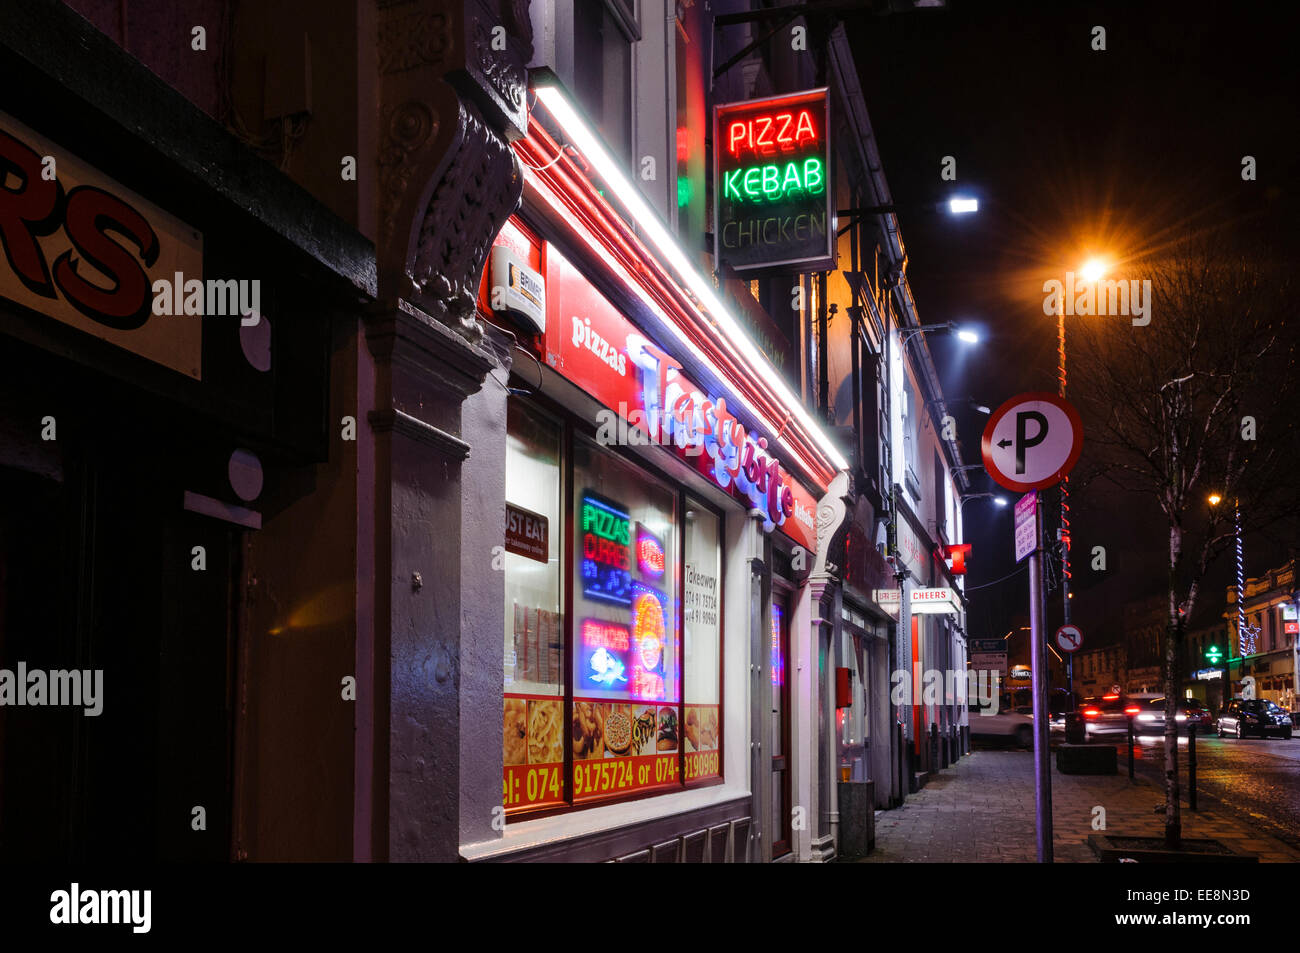 Pizza and kebab shop in a high street of an Irish town at night. Stock Photo